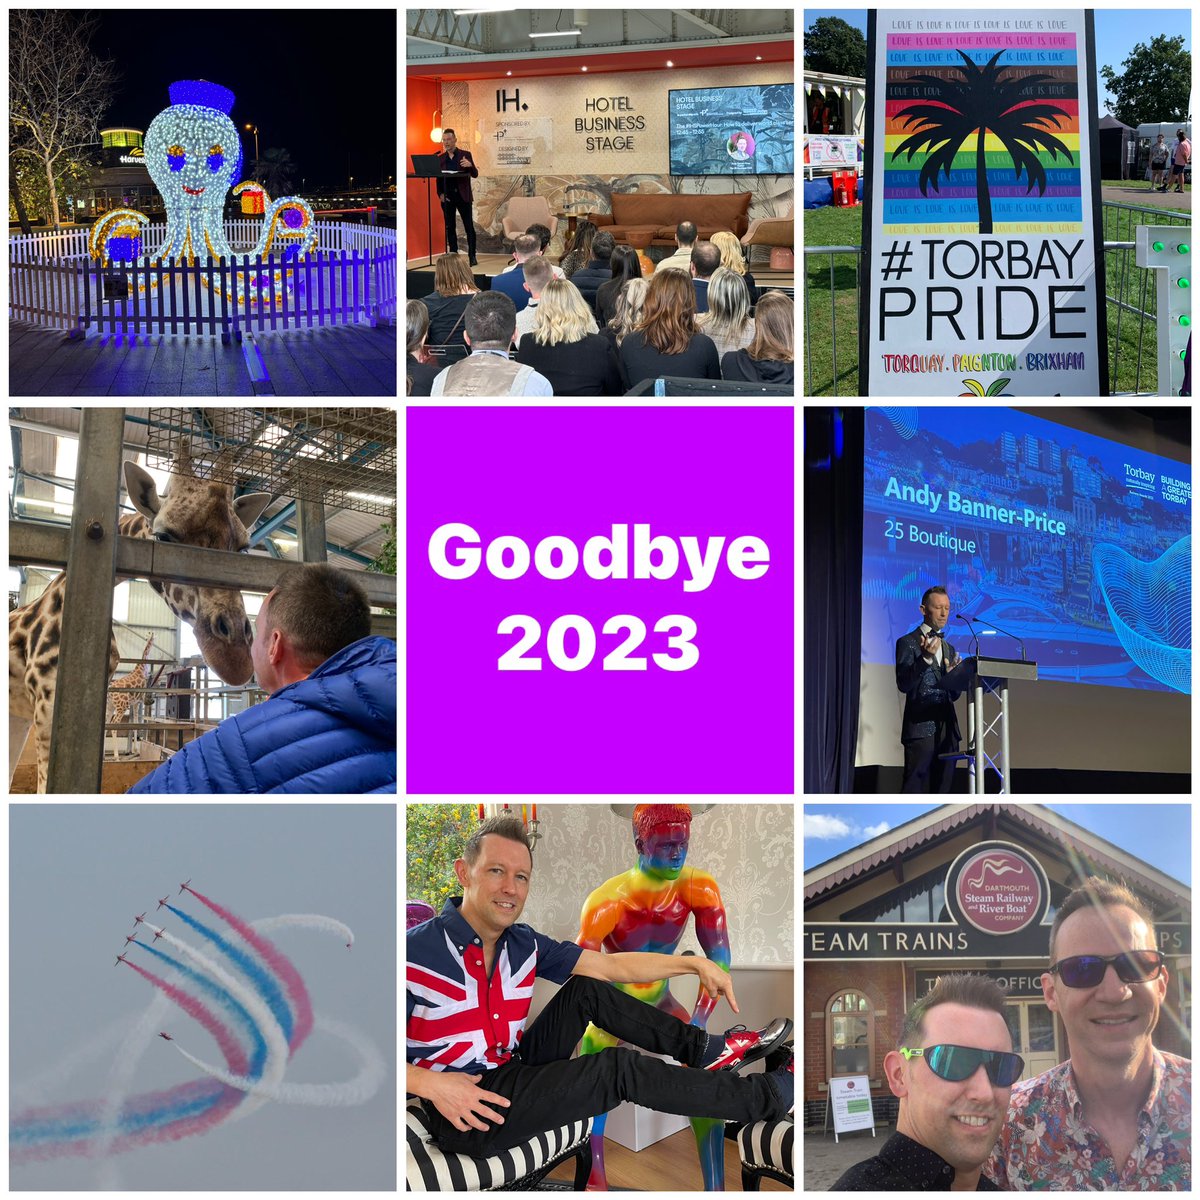 We’re rapidly nearing the end of 2023. It’s been a good year for us. There’s been plenty of events going on in Torquay, and we’ve made some nice memories. We’re looking forward to a new year which is looking busy as we have lots of ahead bookings. Best wishes for 2024 from A&J